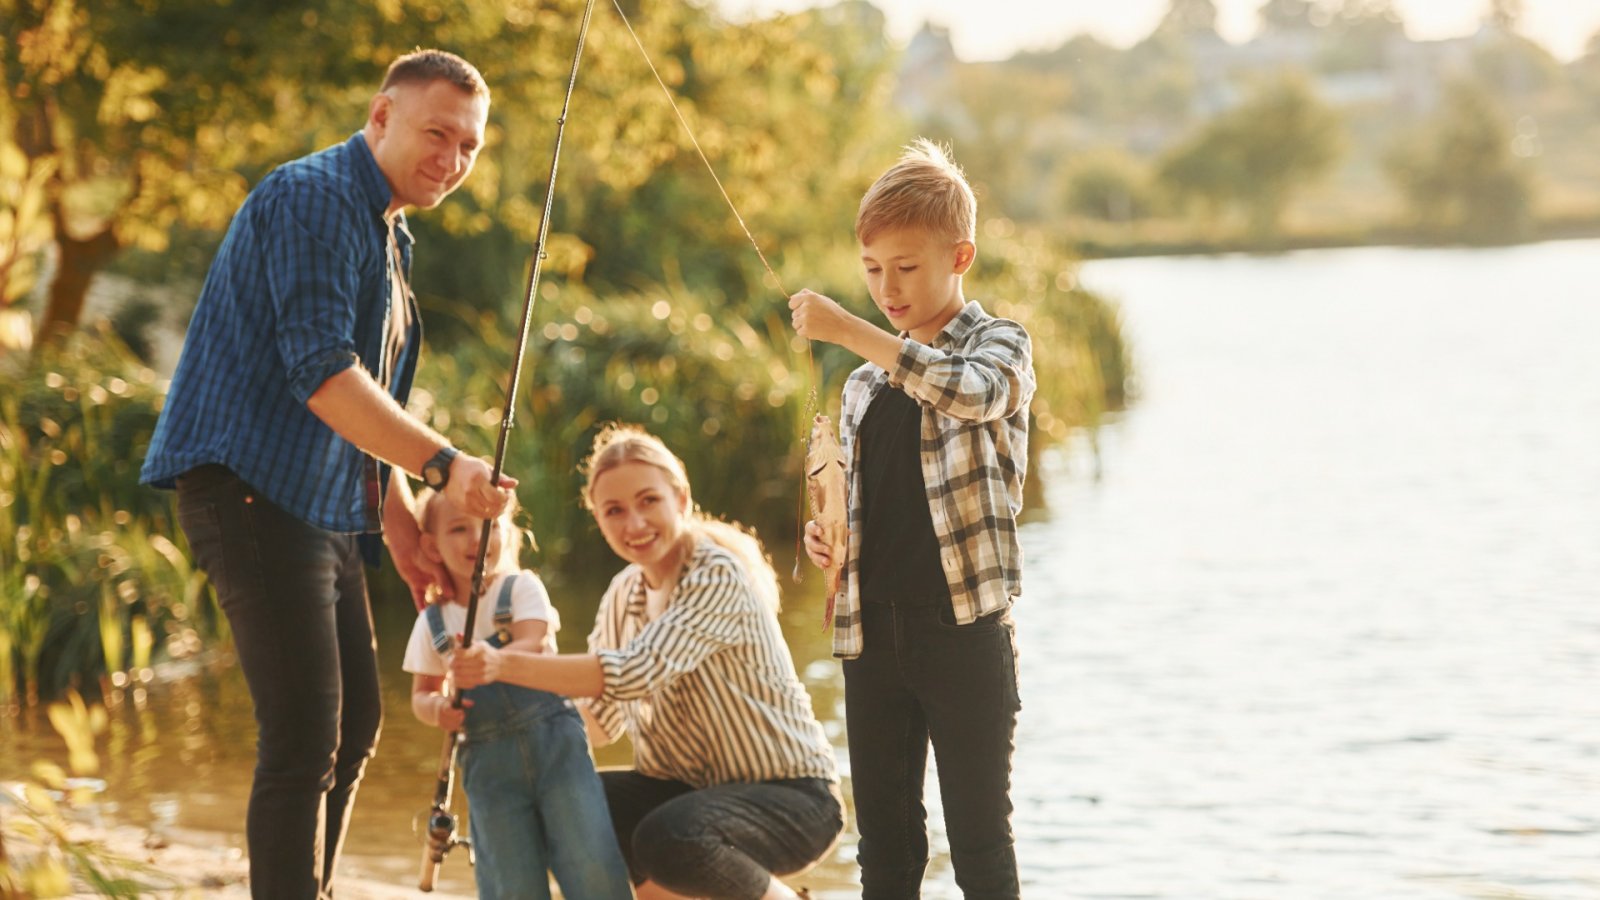 Making memories: fun fishing expeditions for families in nature